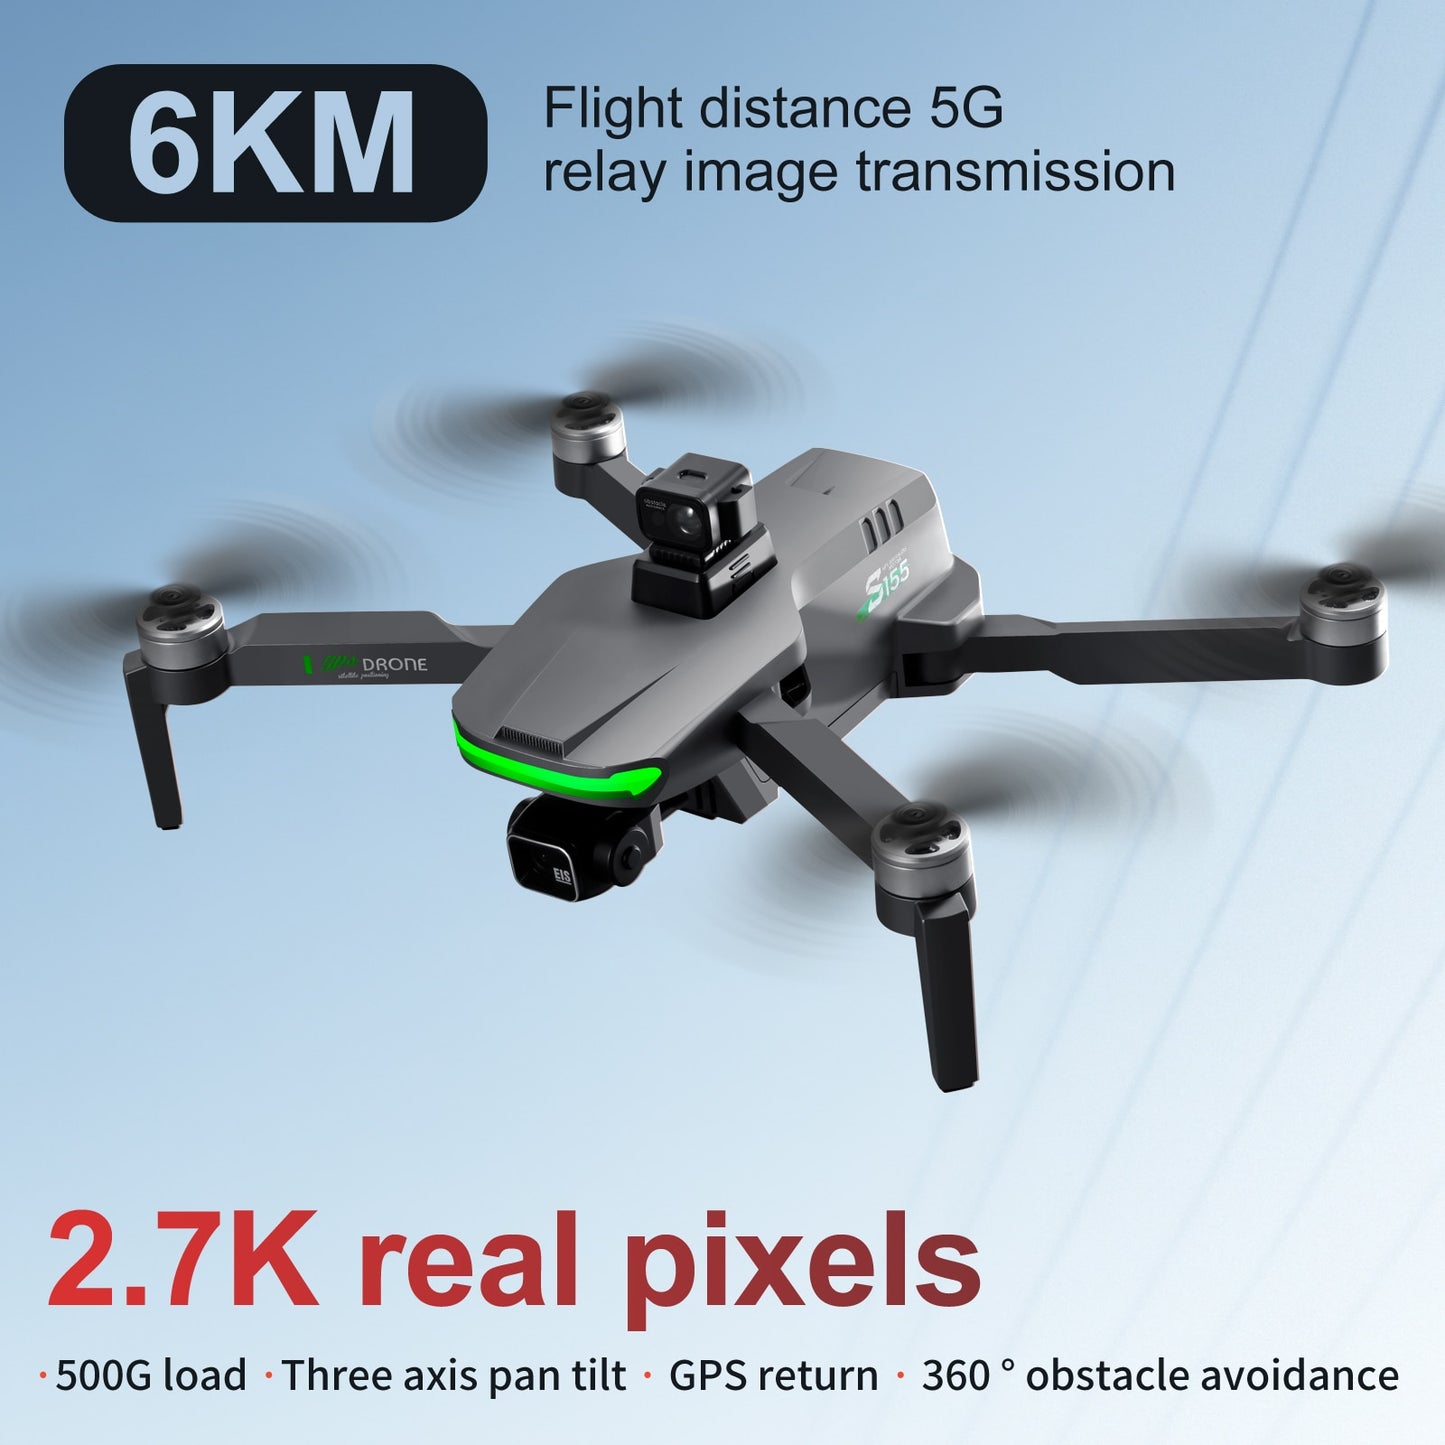 S155 Drone, Flight distance 5G 6KM relay image transmission DRONE 2.7